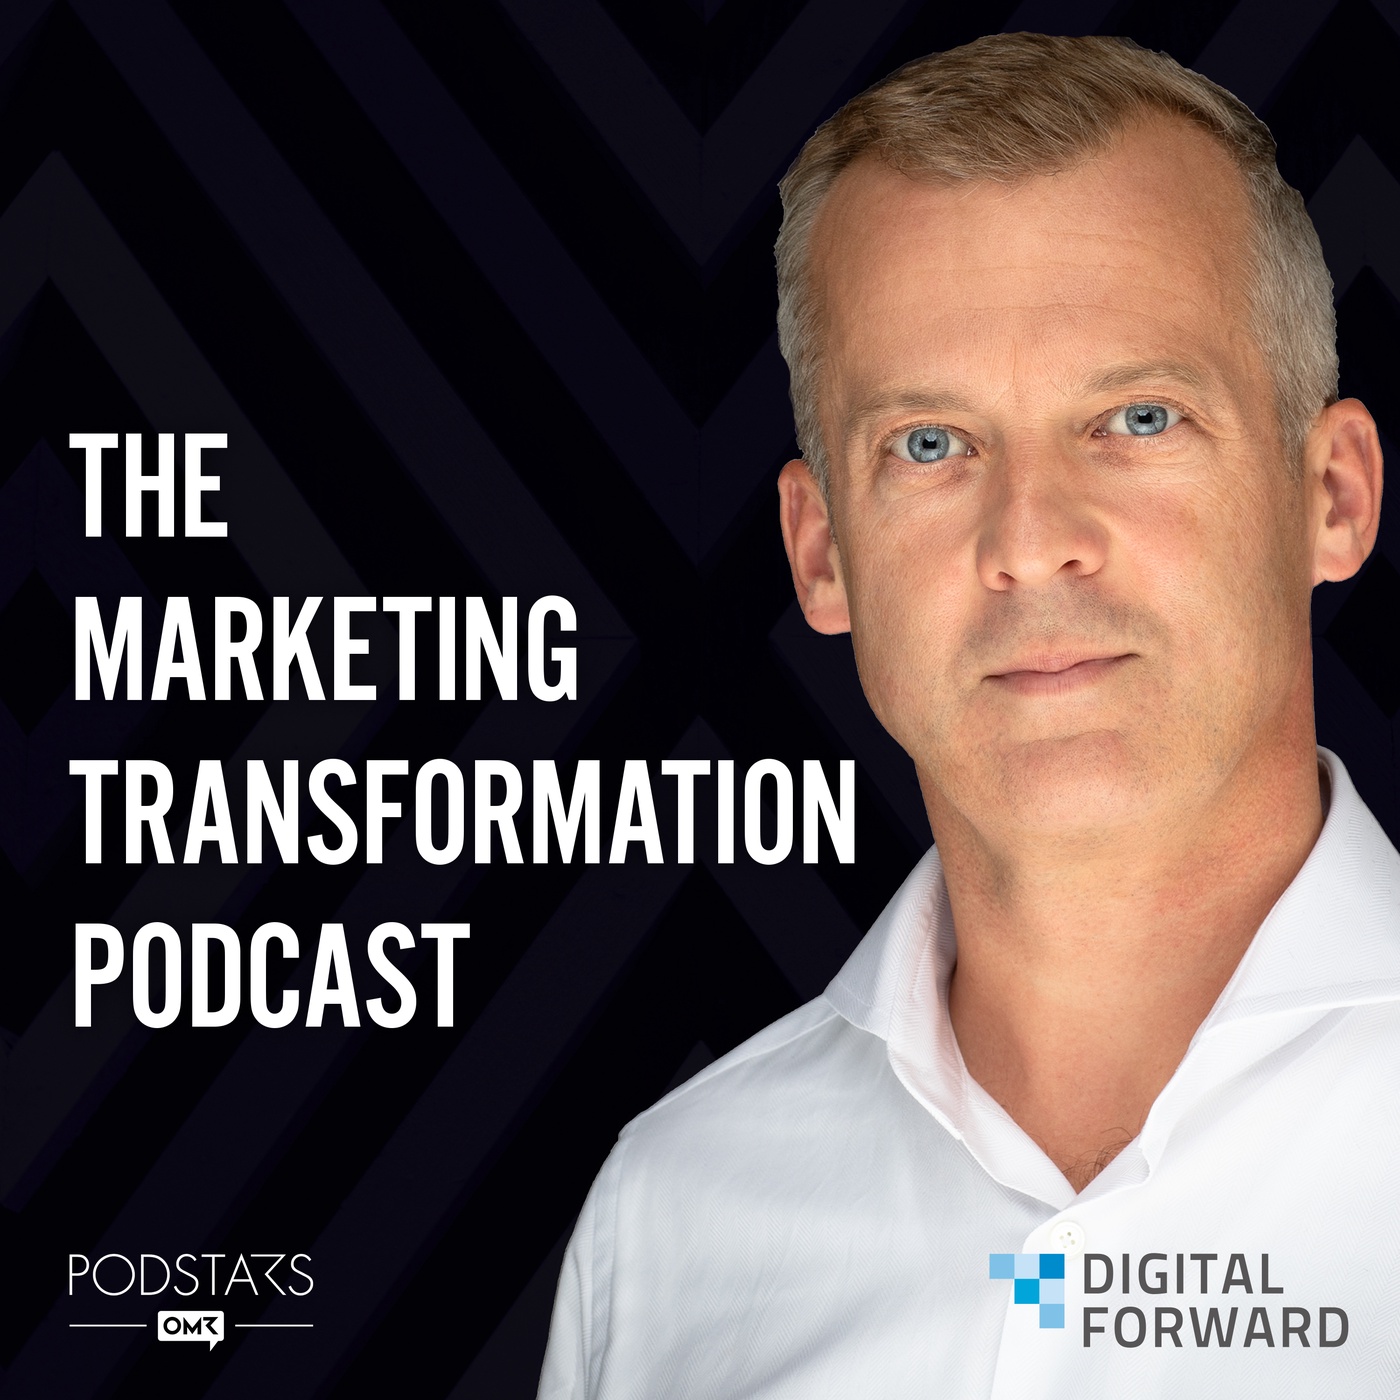 The Marketing Transformation Podcast